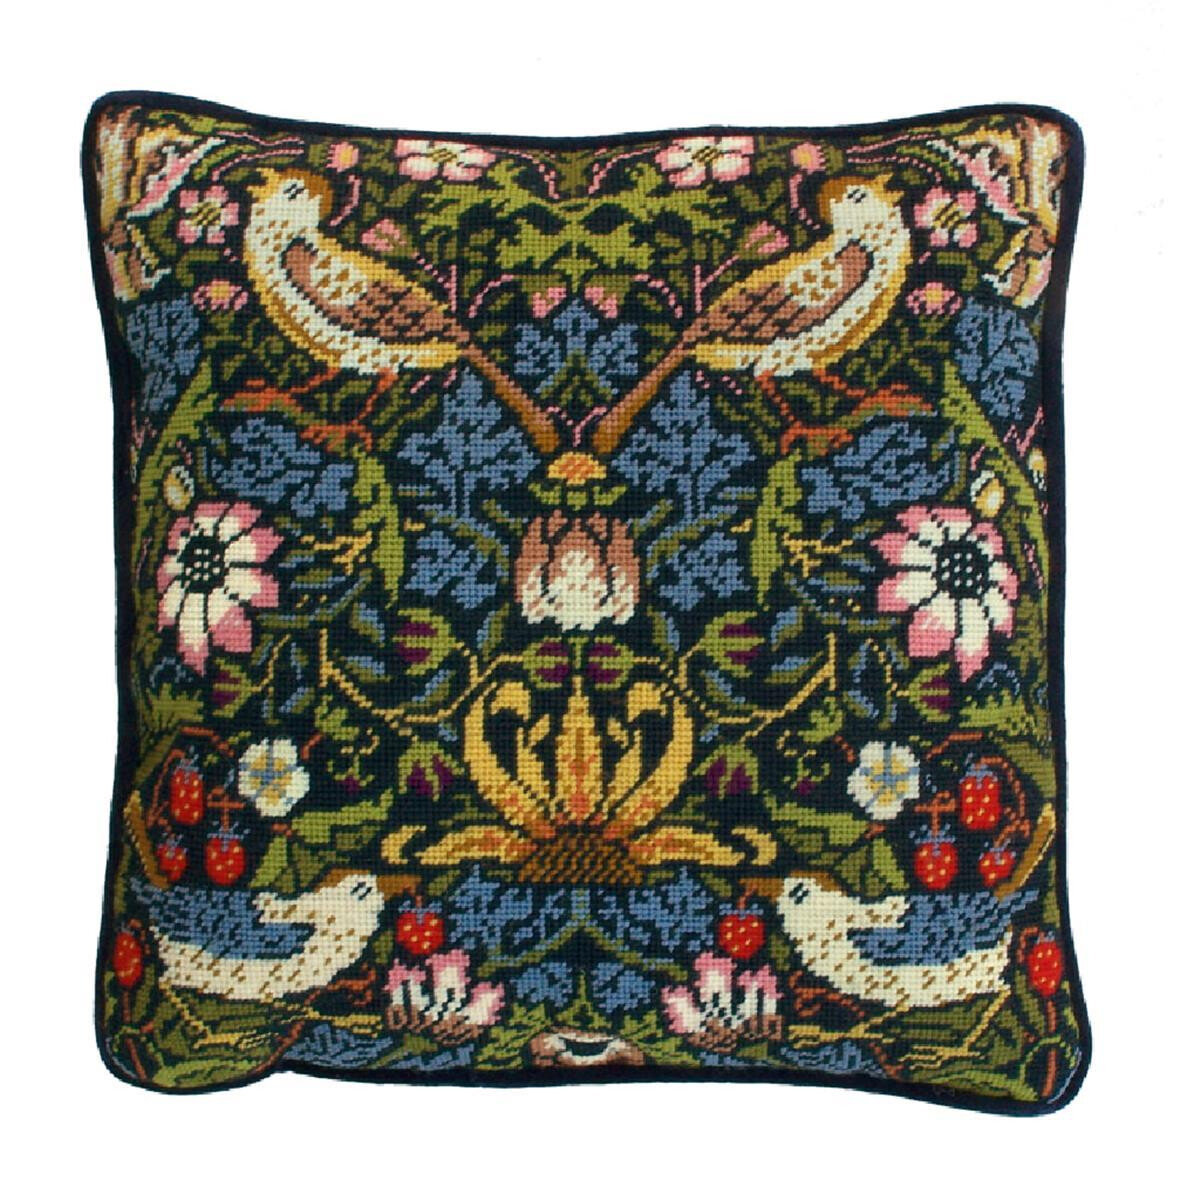 A square cushion with an intricate embroidery design...